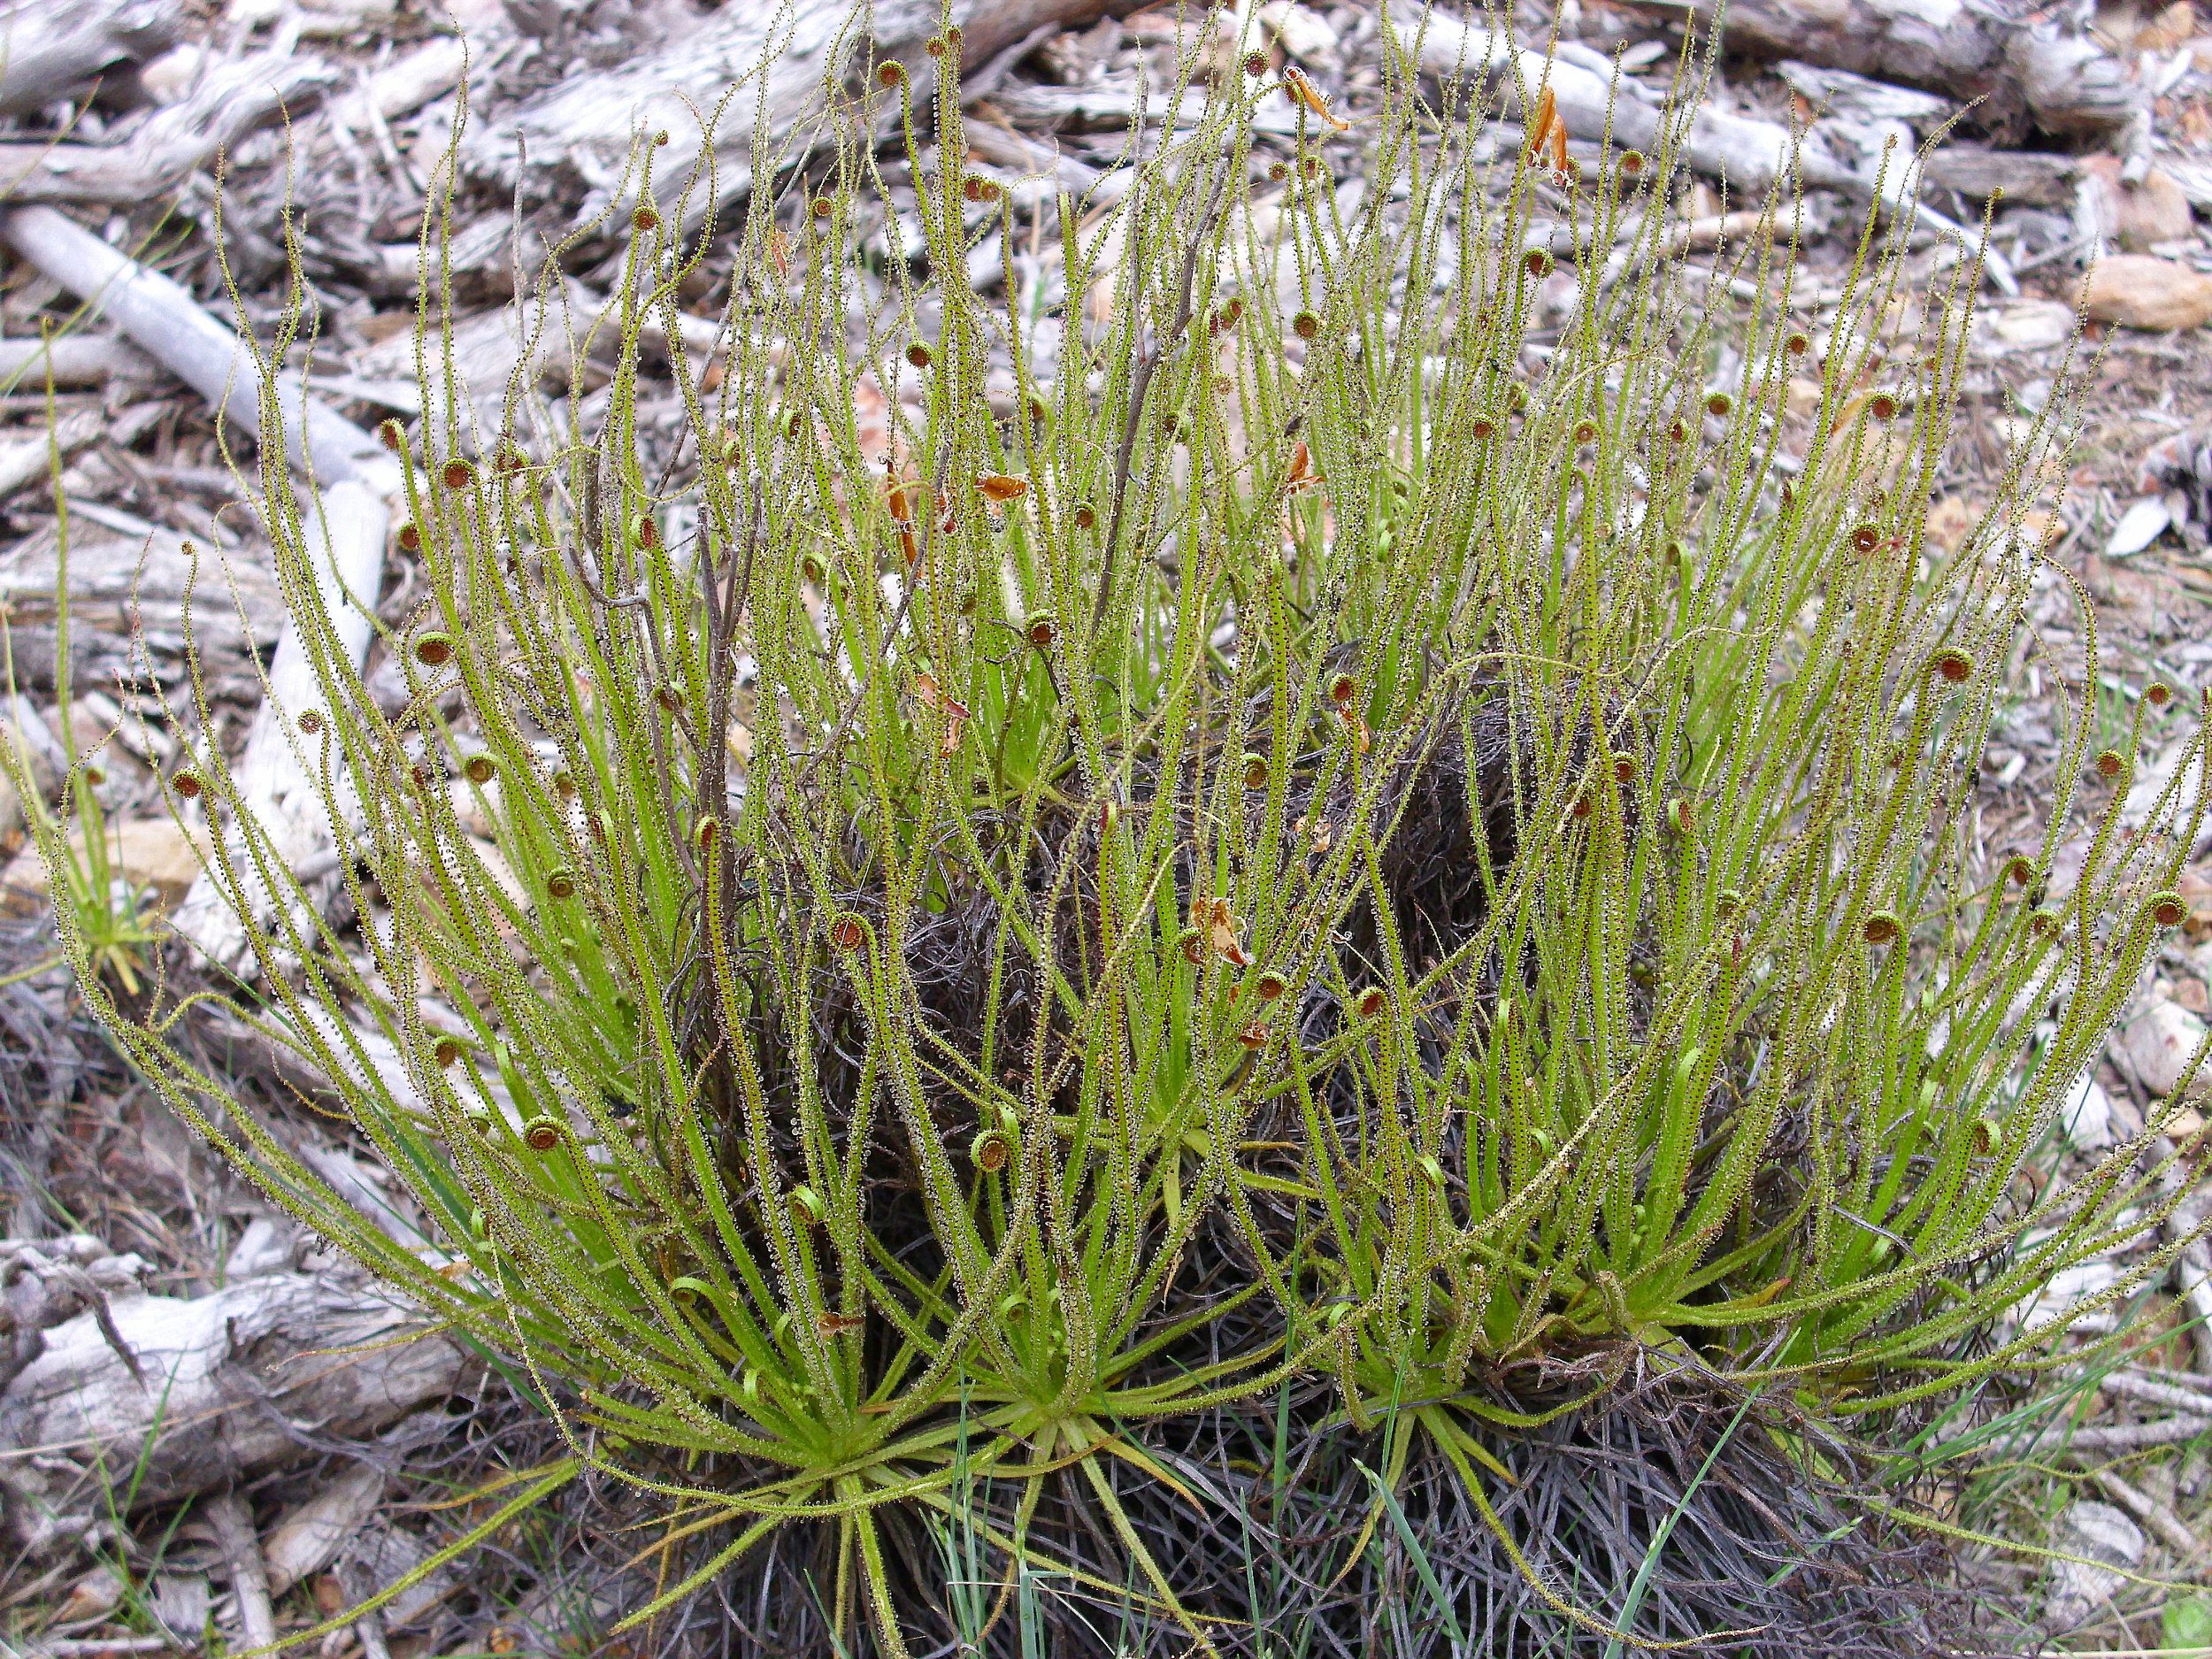 How to grow and care for Drosophyllum Lusitanicum (Dewy Pine) carnivorous plants in terrariums